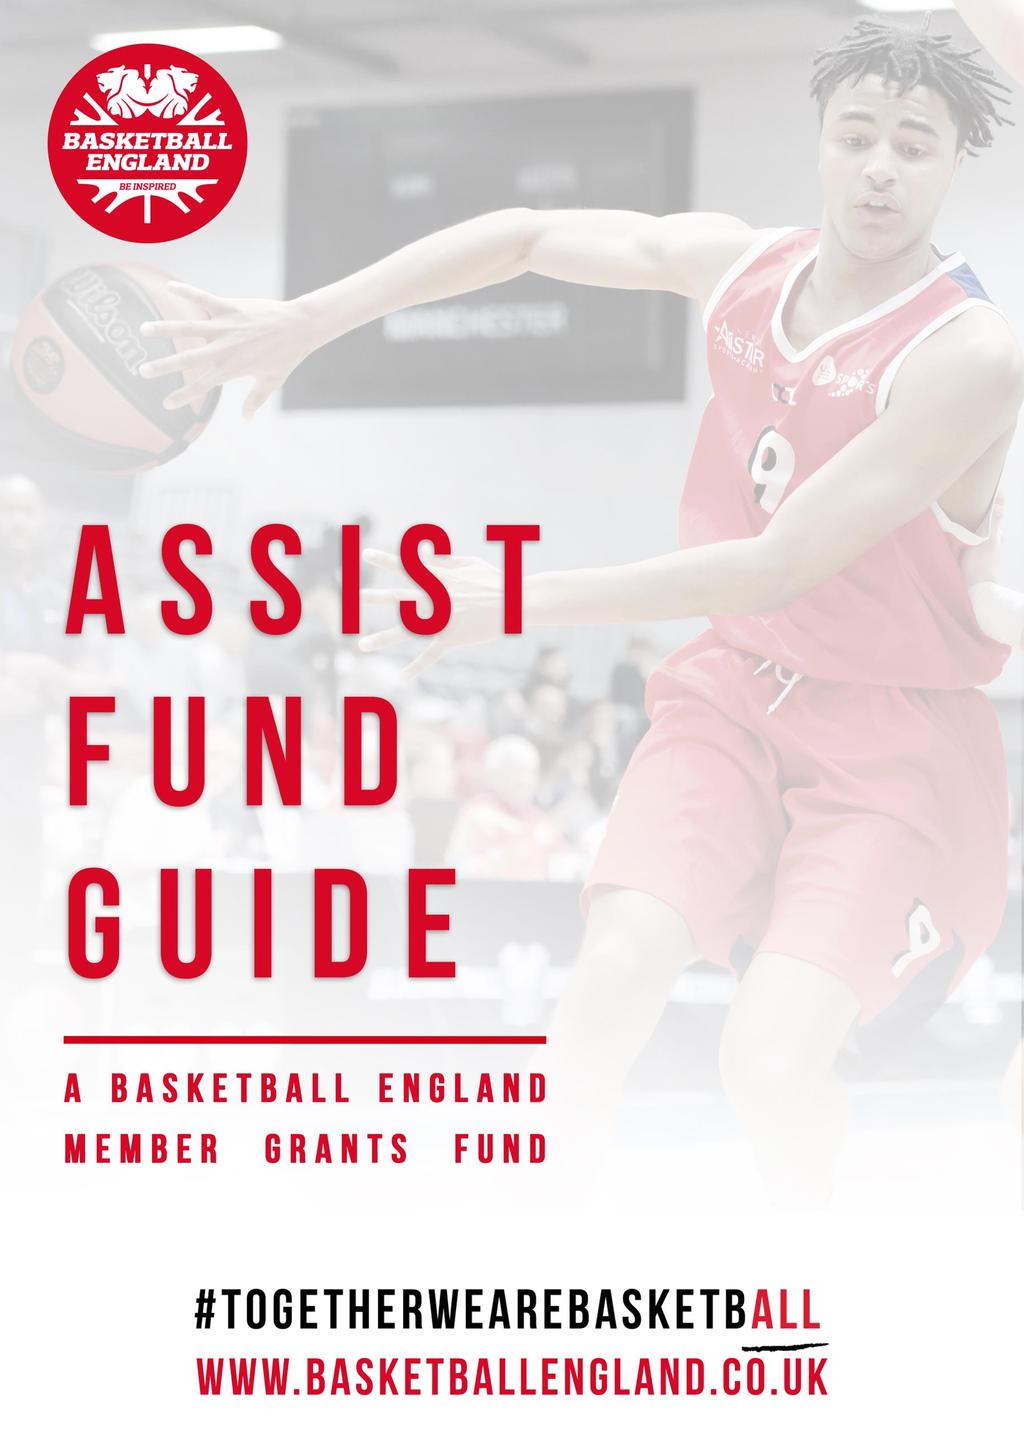 Assist Fund Guide A Basketball England member grants